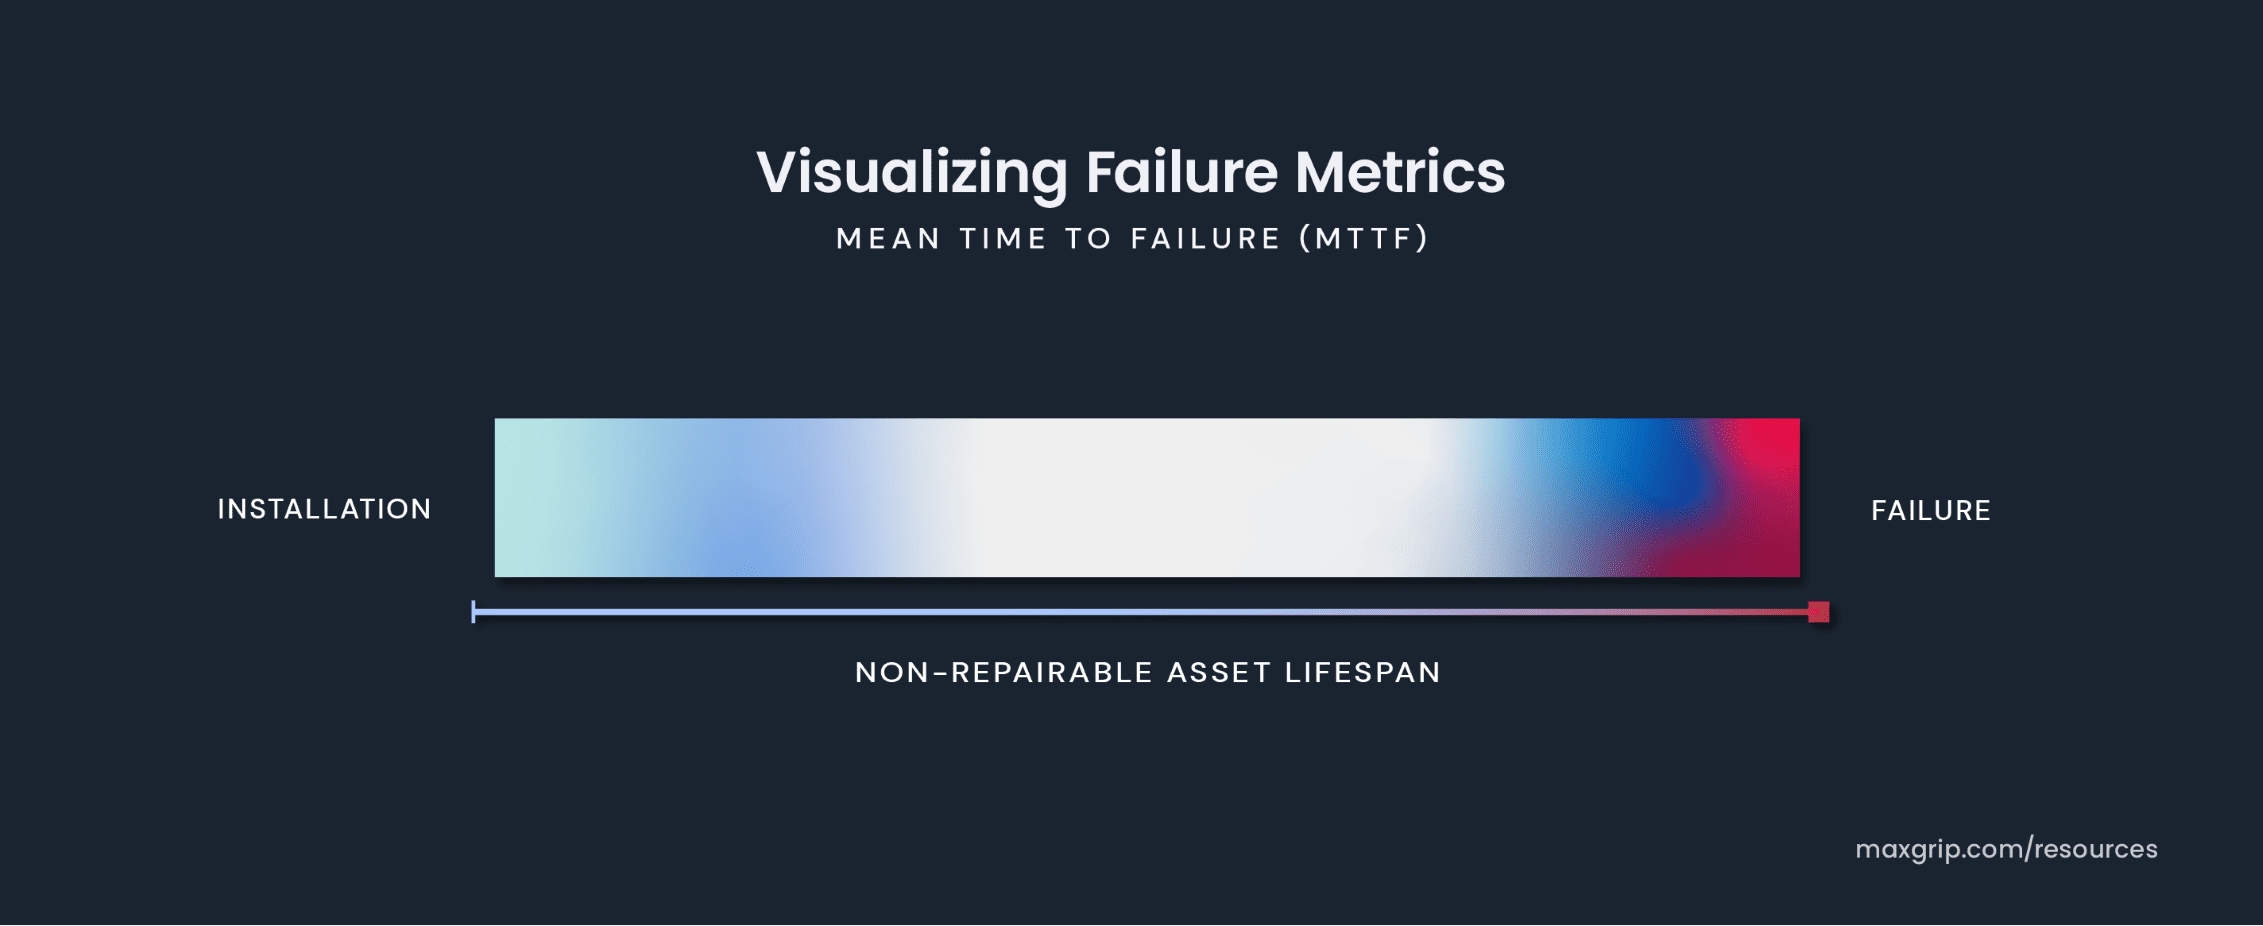 Visualization of Mean Time to Failure MTTF